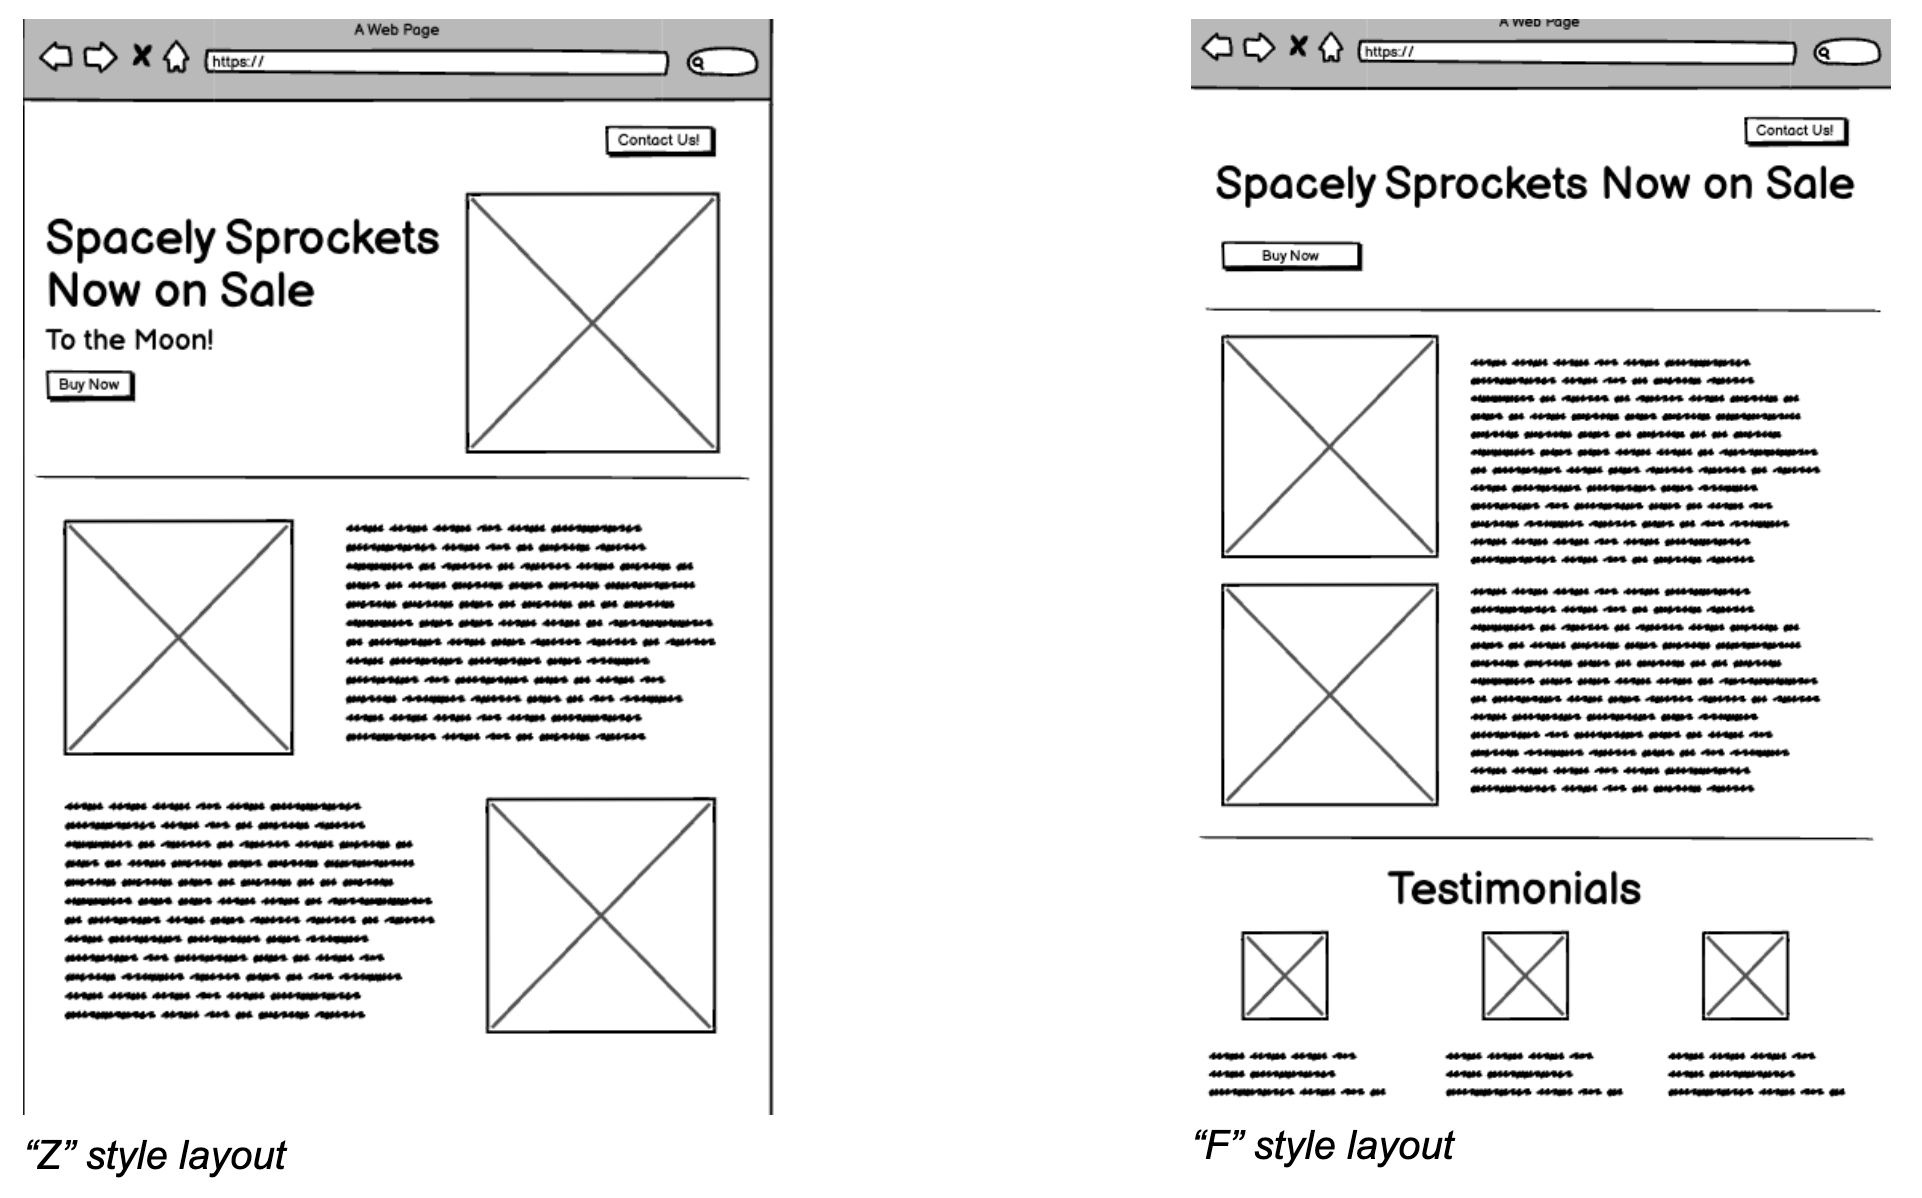 wireframe A/B testing layout